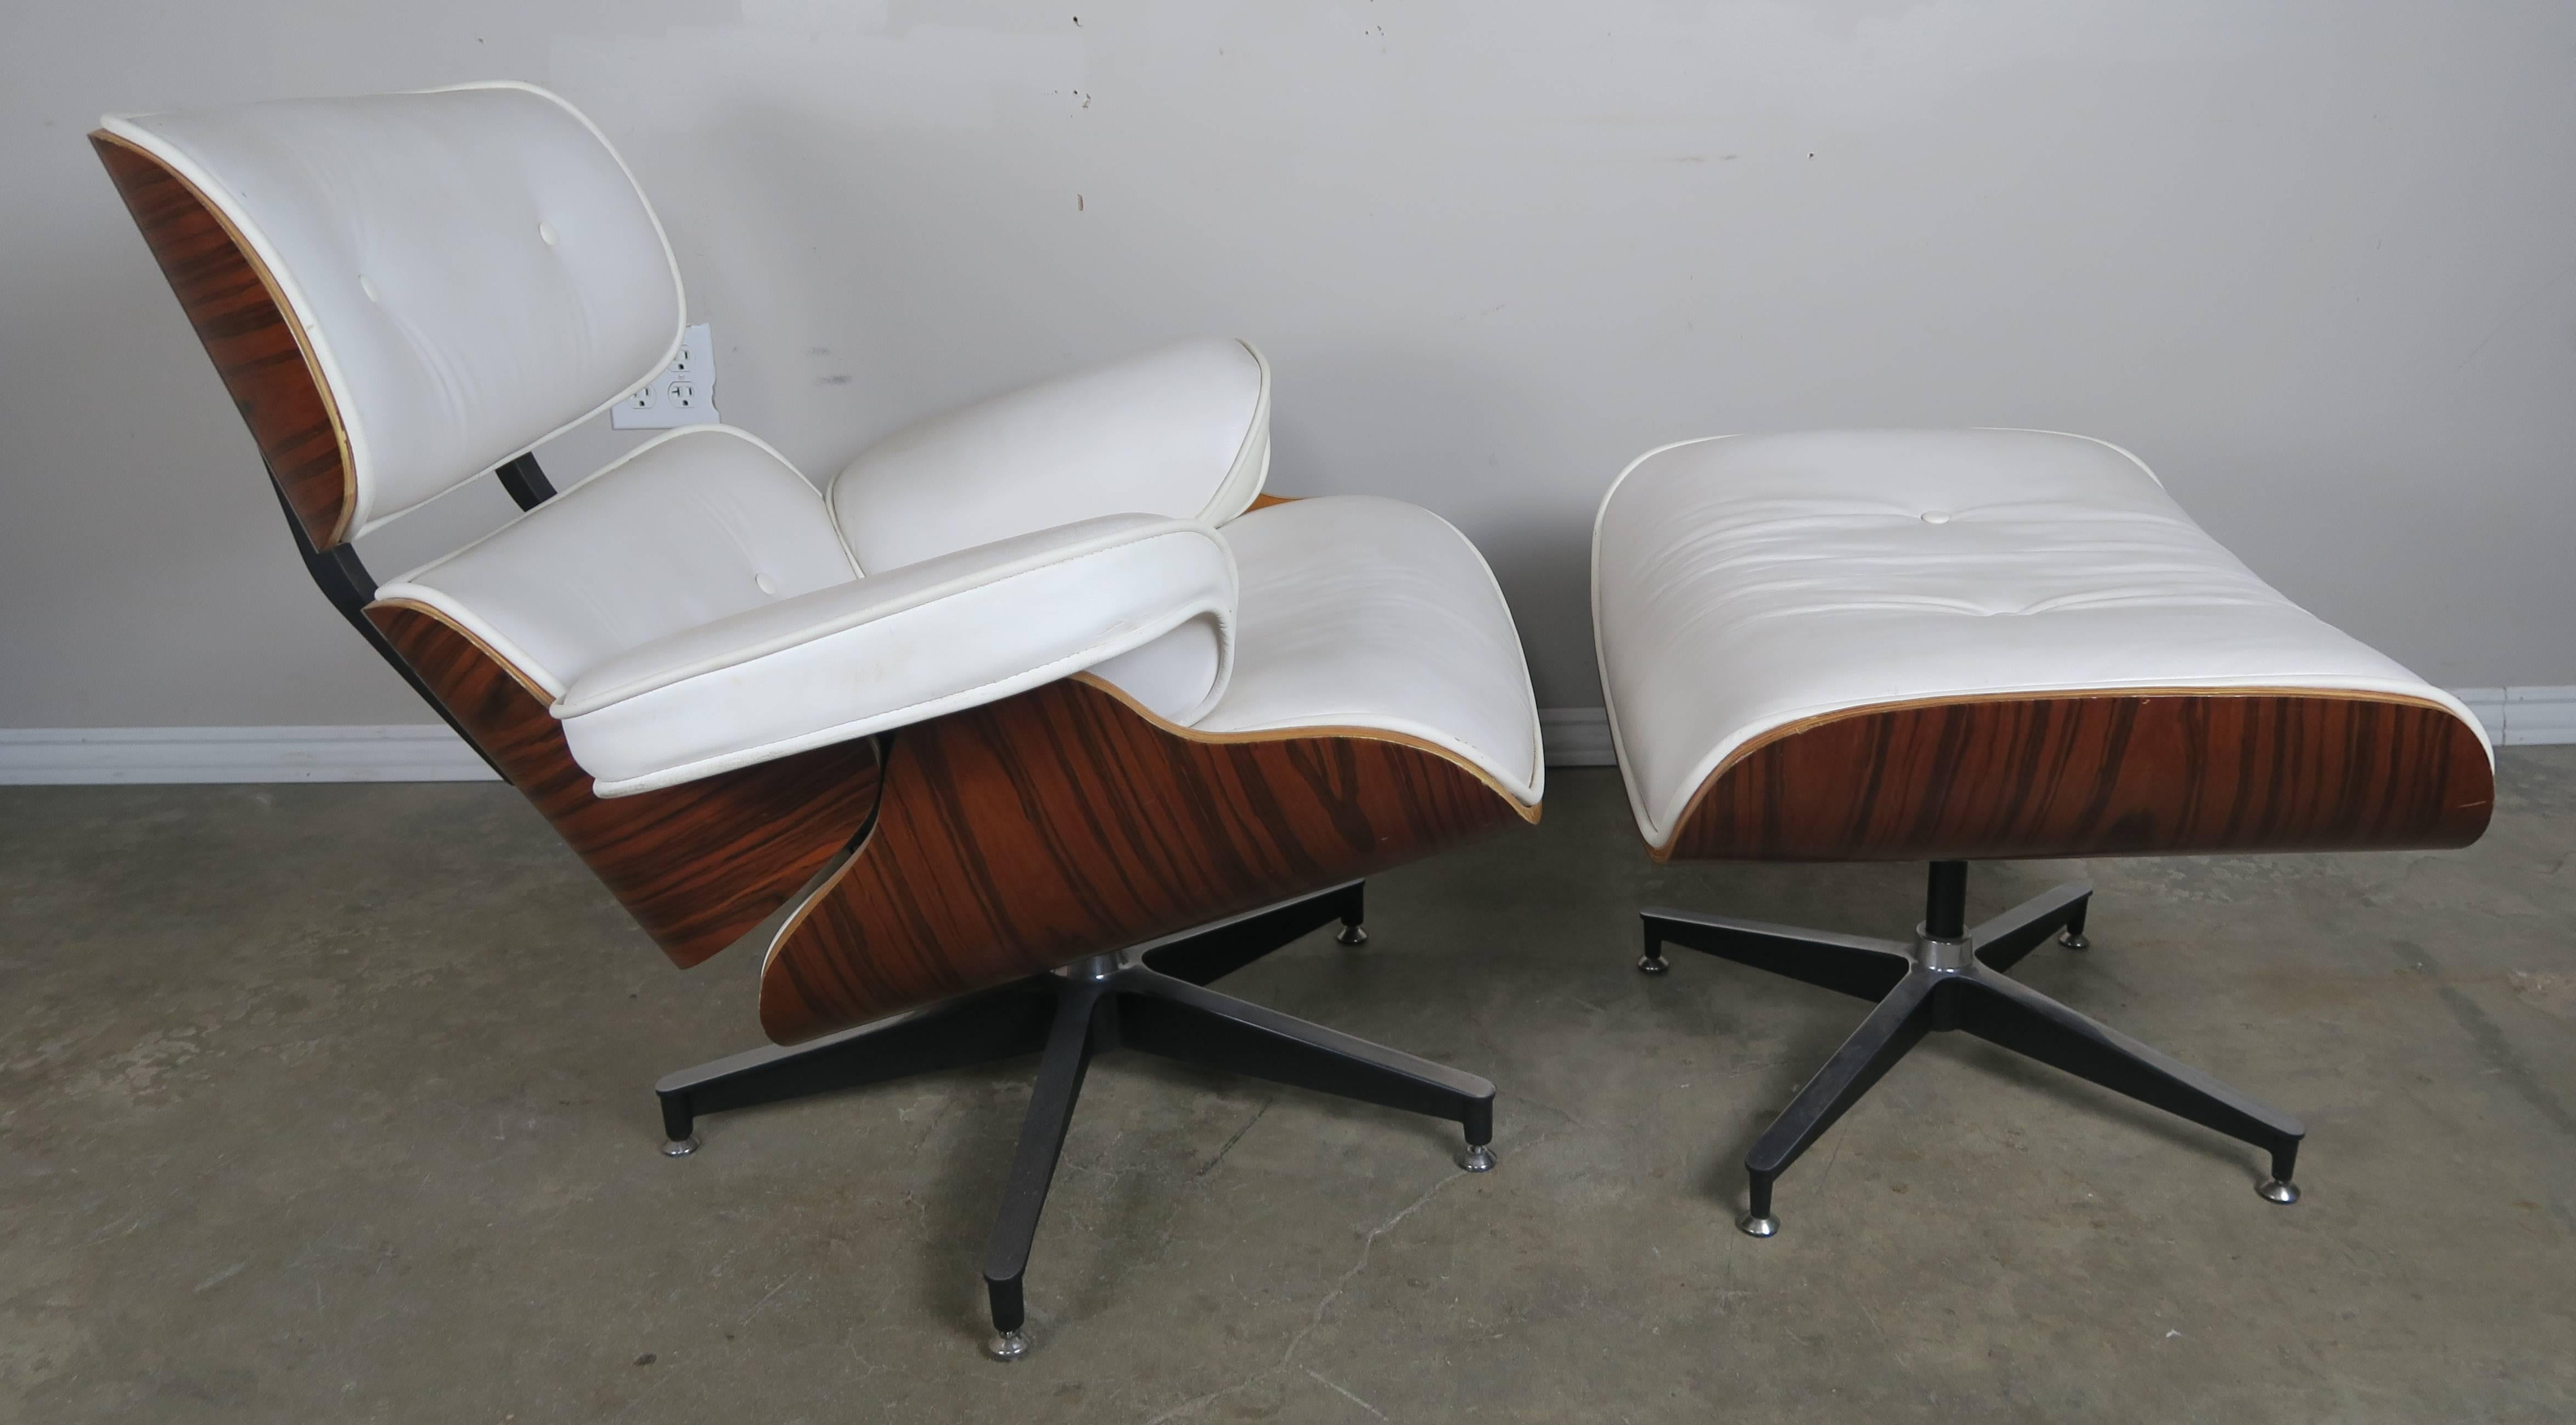 Vintage 1970s Herman Miller Eames style lounge chair and ottoman in rosewood. Upholstered in original white leather that is still in excellent condition. Aluminium base.